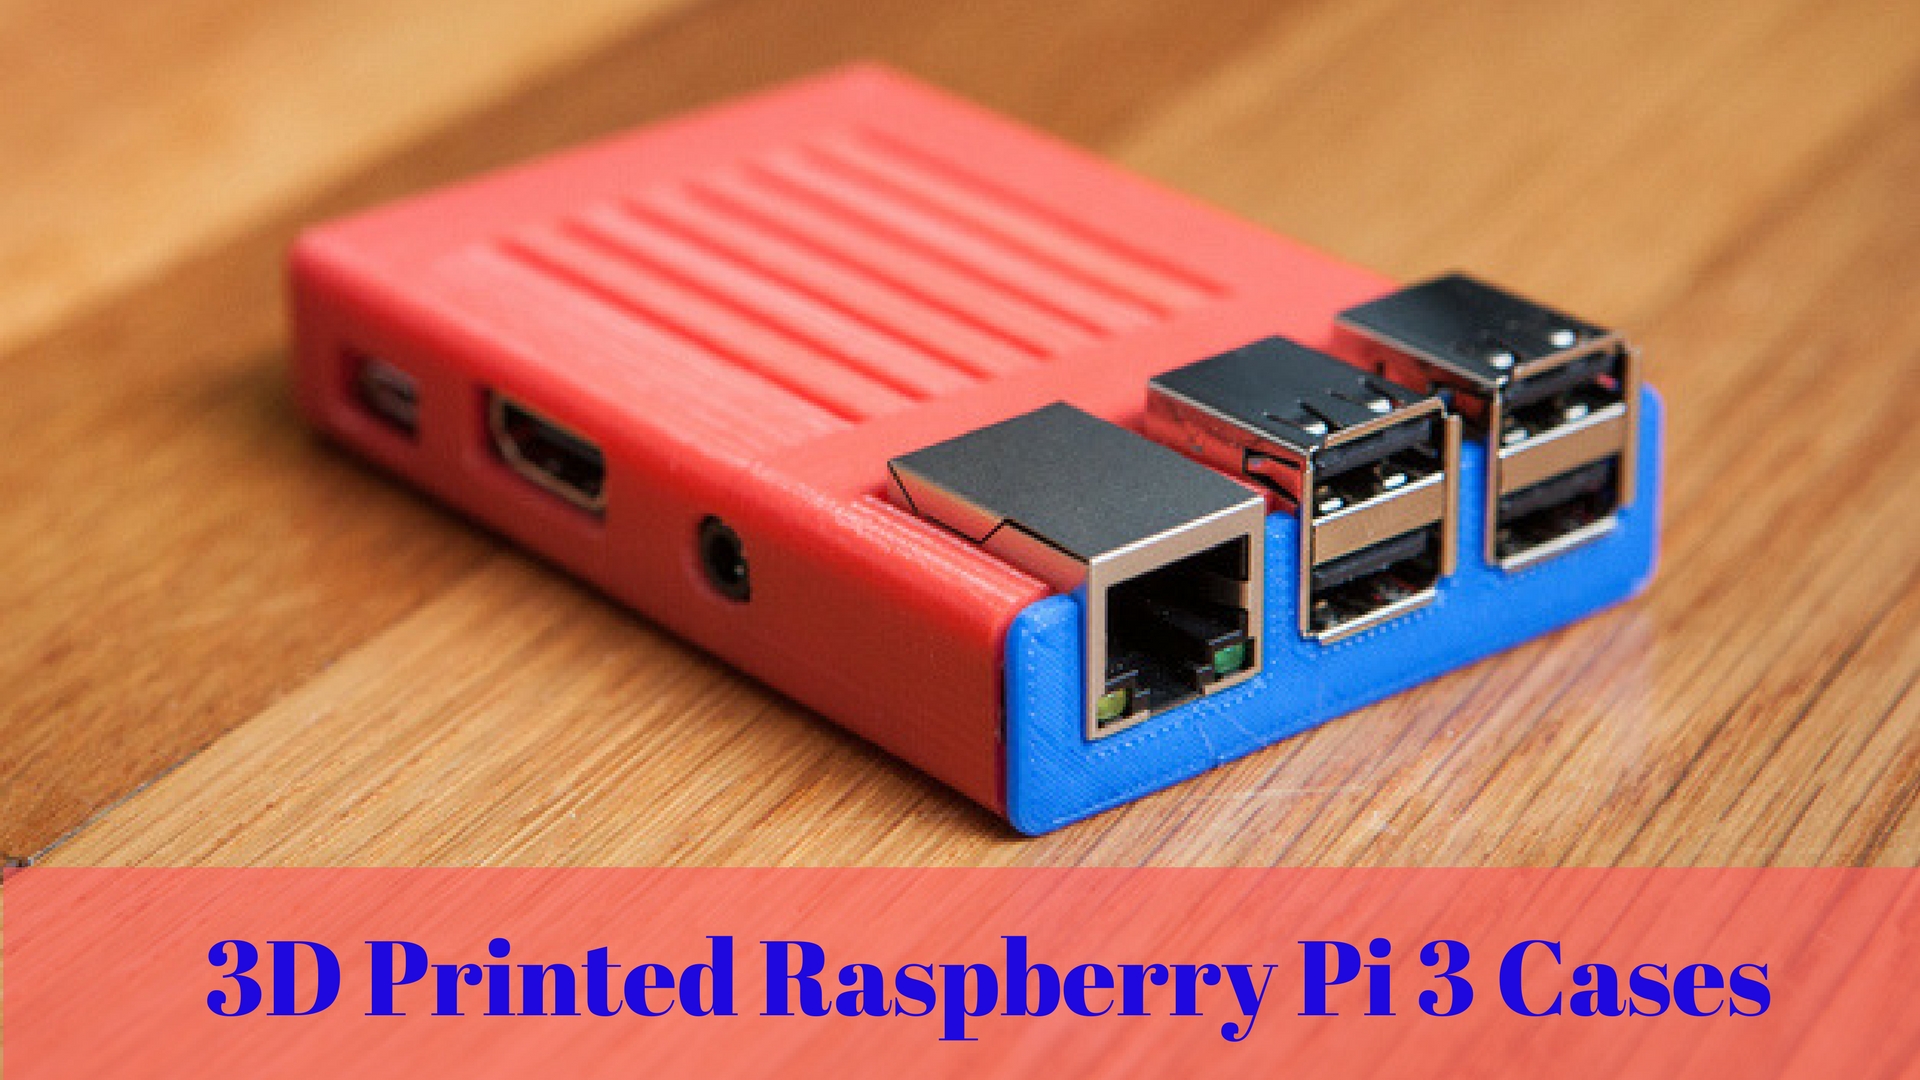 3D Print Your Own Raspberry Pi 3 Cases! – Geeetech